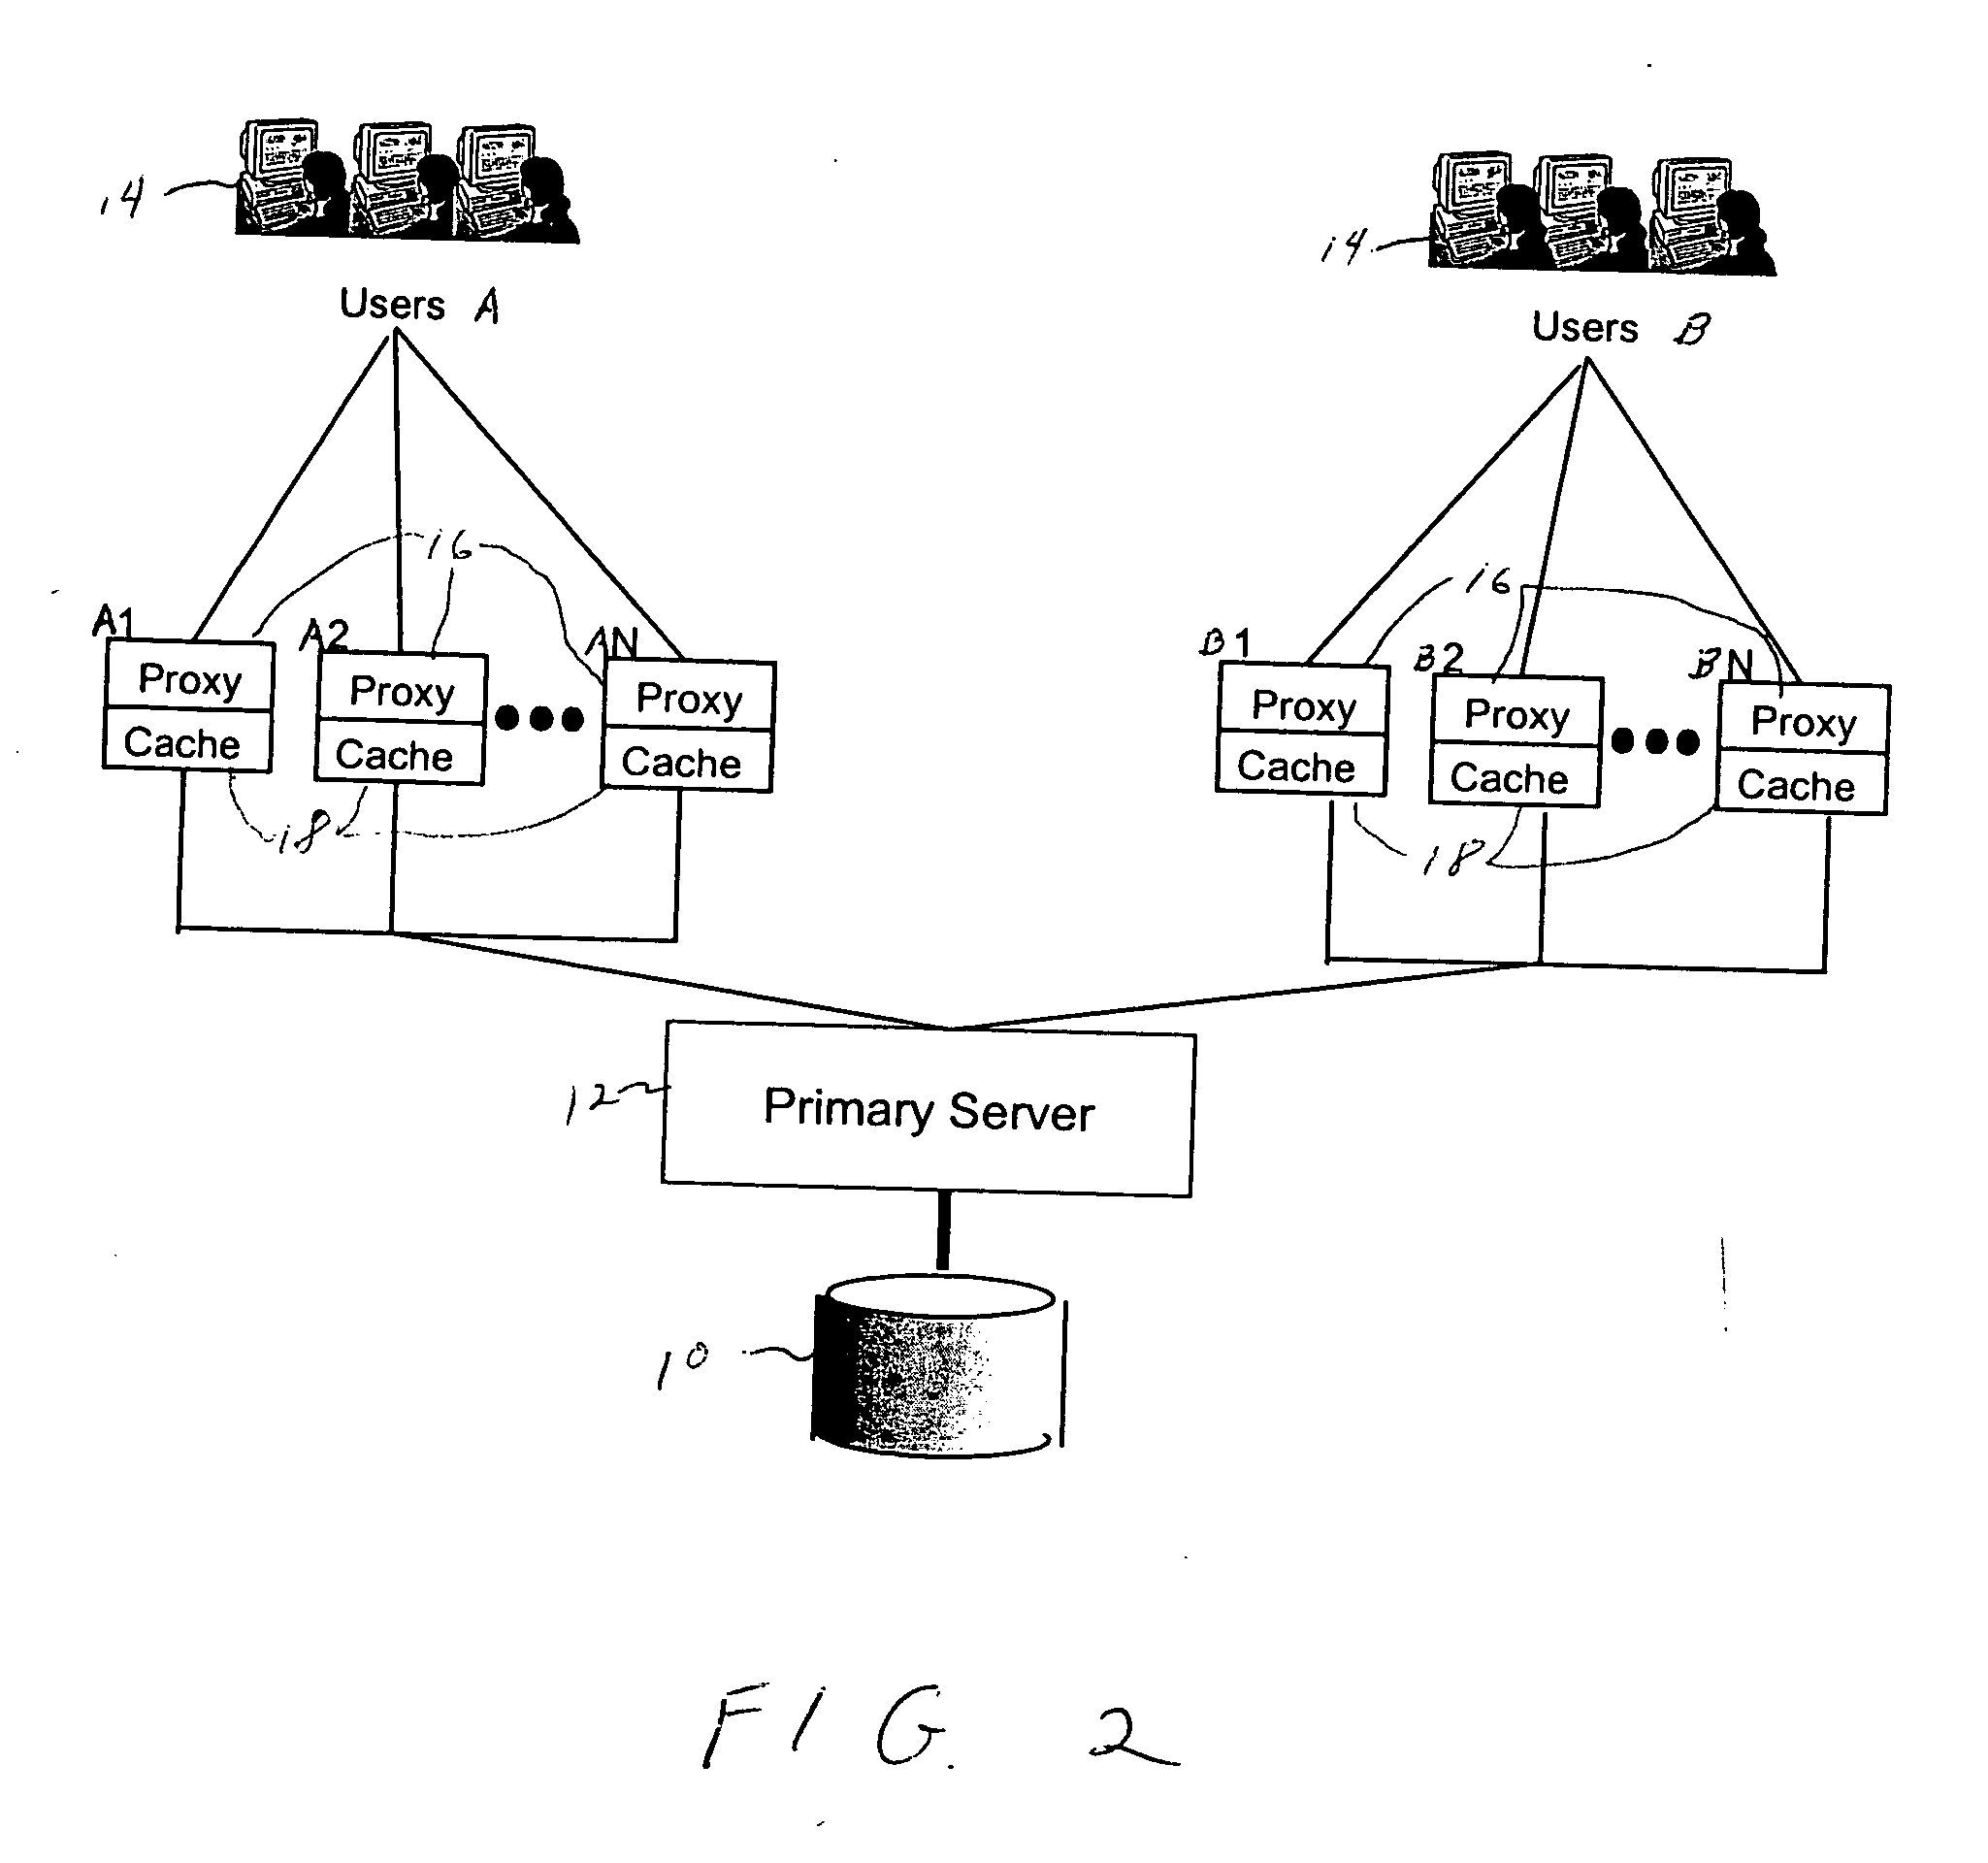 Proxy and cache architecture for document storage